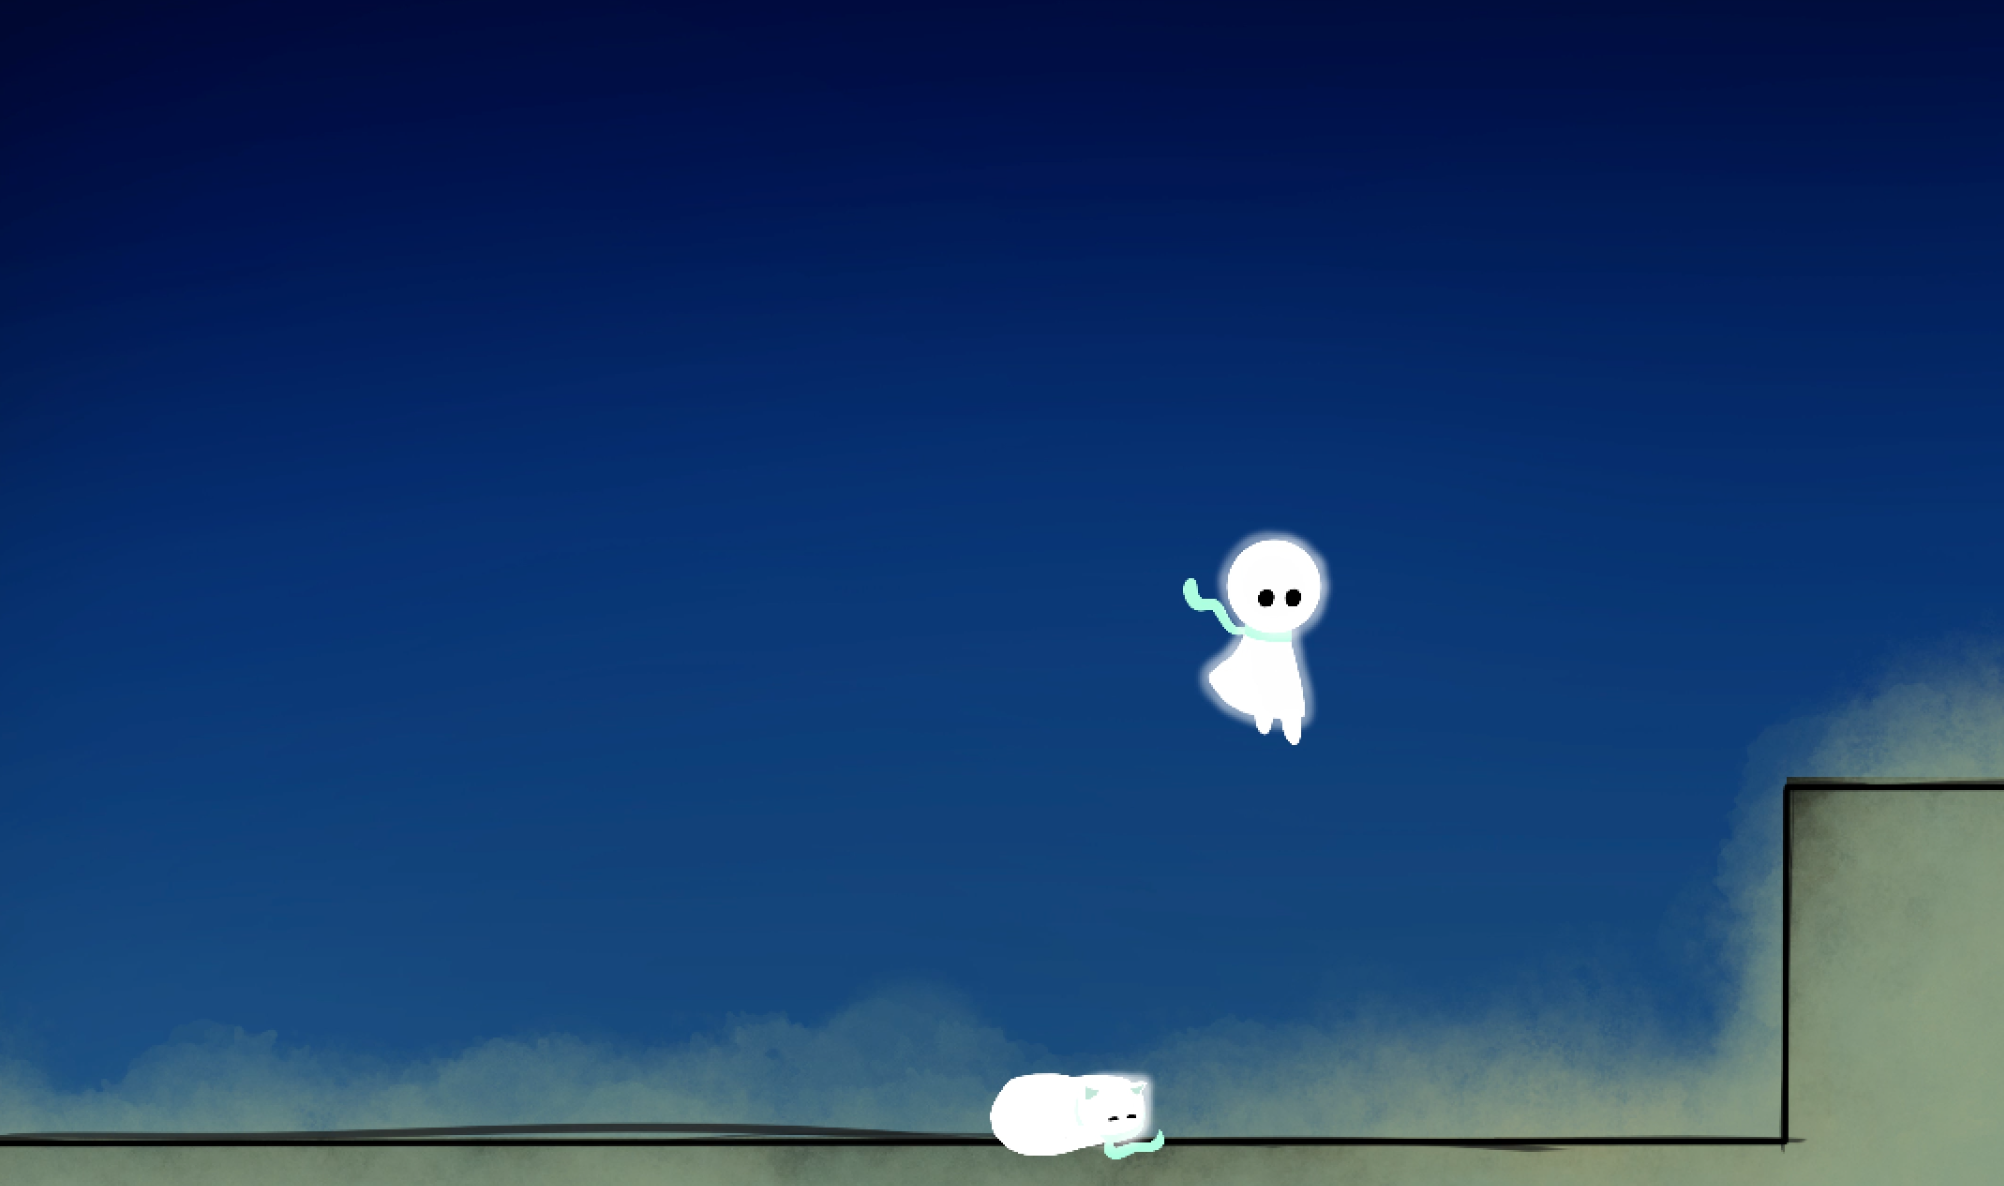 player character mid-jump with sleeping cat on floor